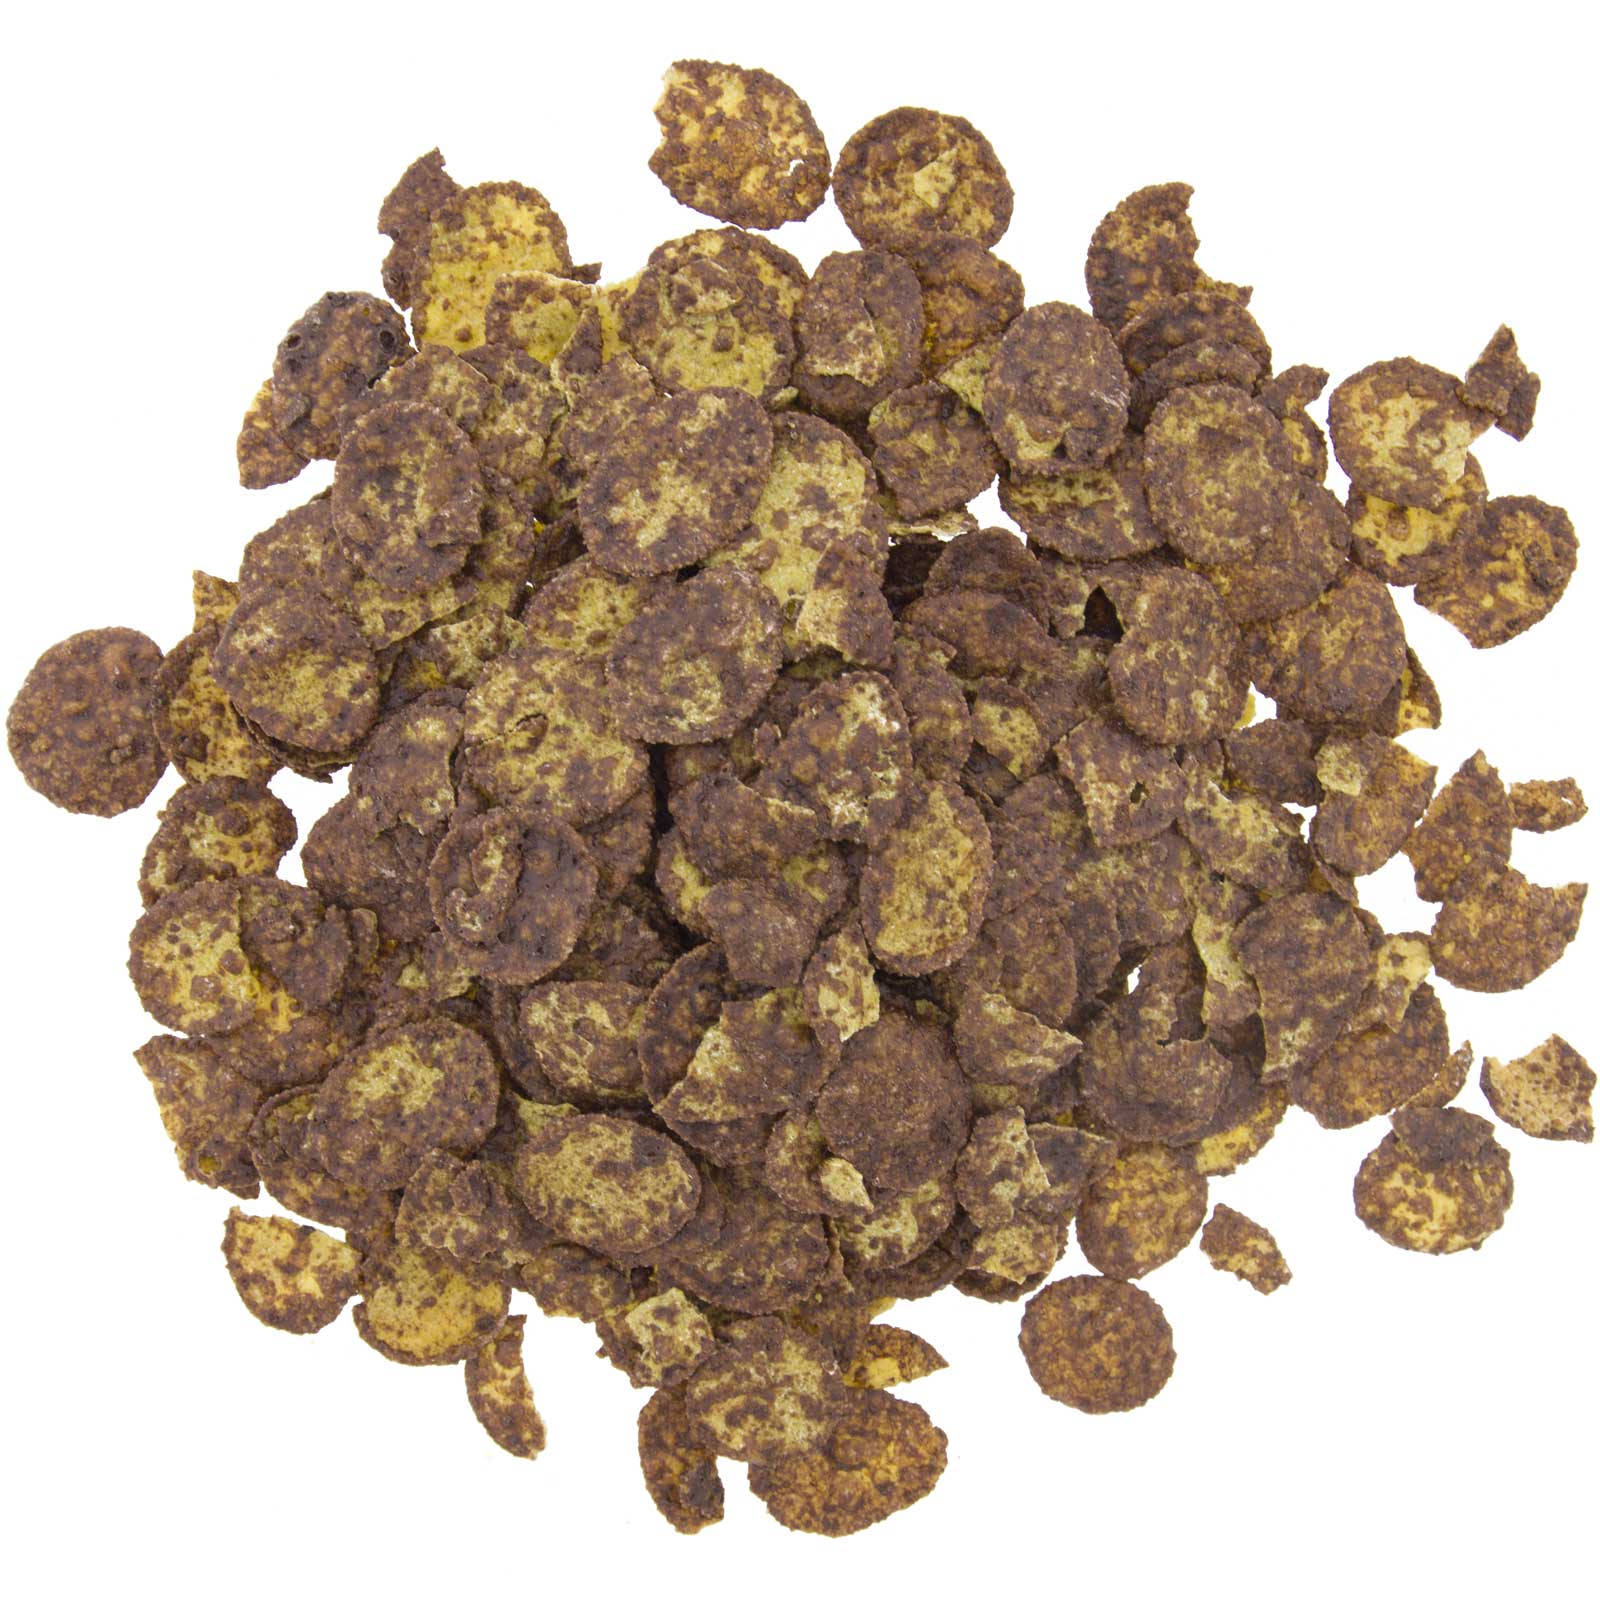 Ecological 350g chocoornflakes